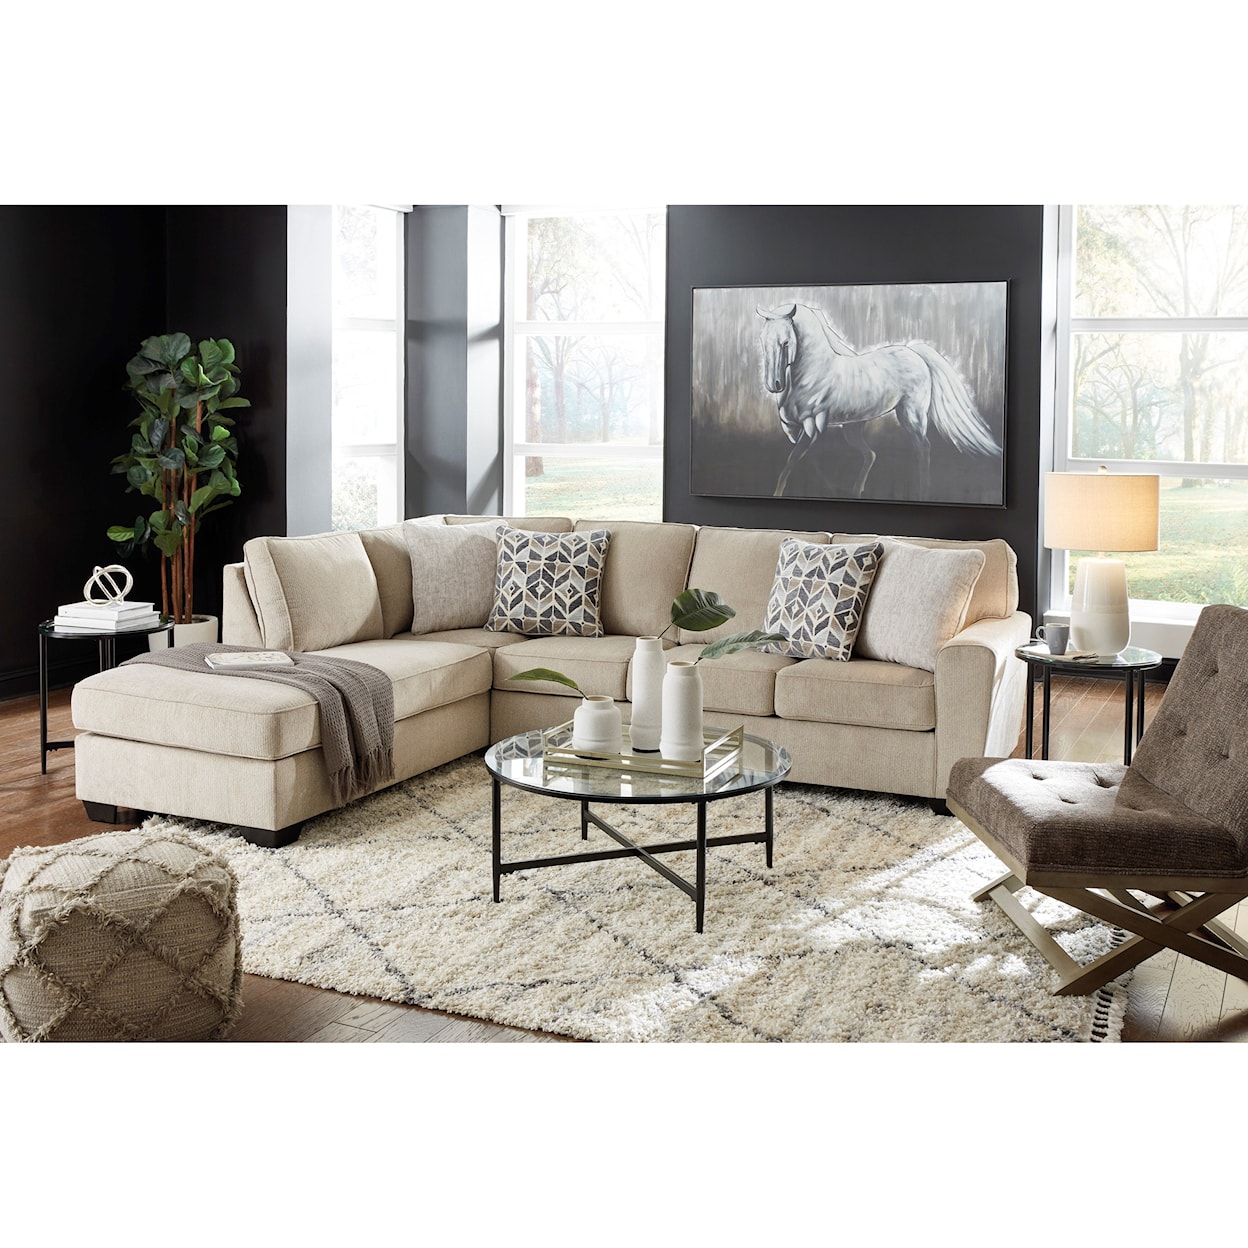 Signature Design by Ashley Furniture Decelle 2-Piece Sectional with Chaise